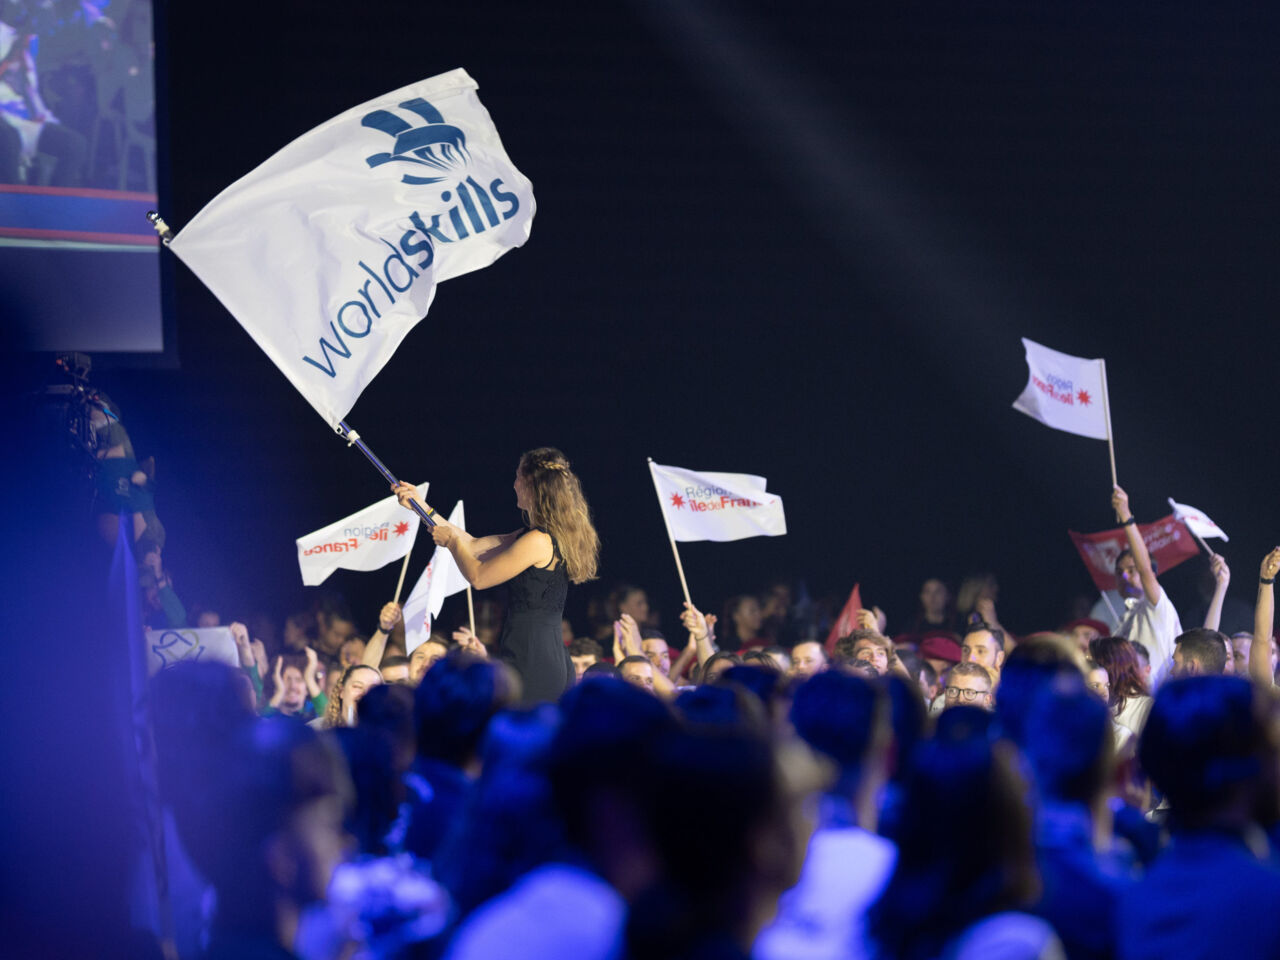 WorldSkills Champions Trust representative for Europe, Cloé Lemarechal, carries the WorldSkills flag across the stage during the Closing Ceremony.
